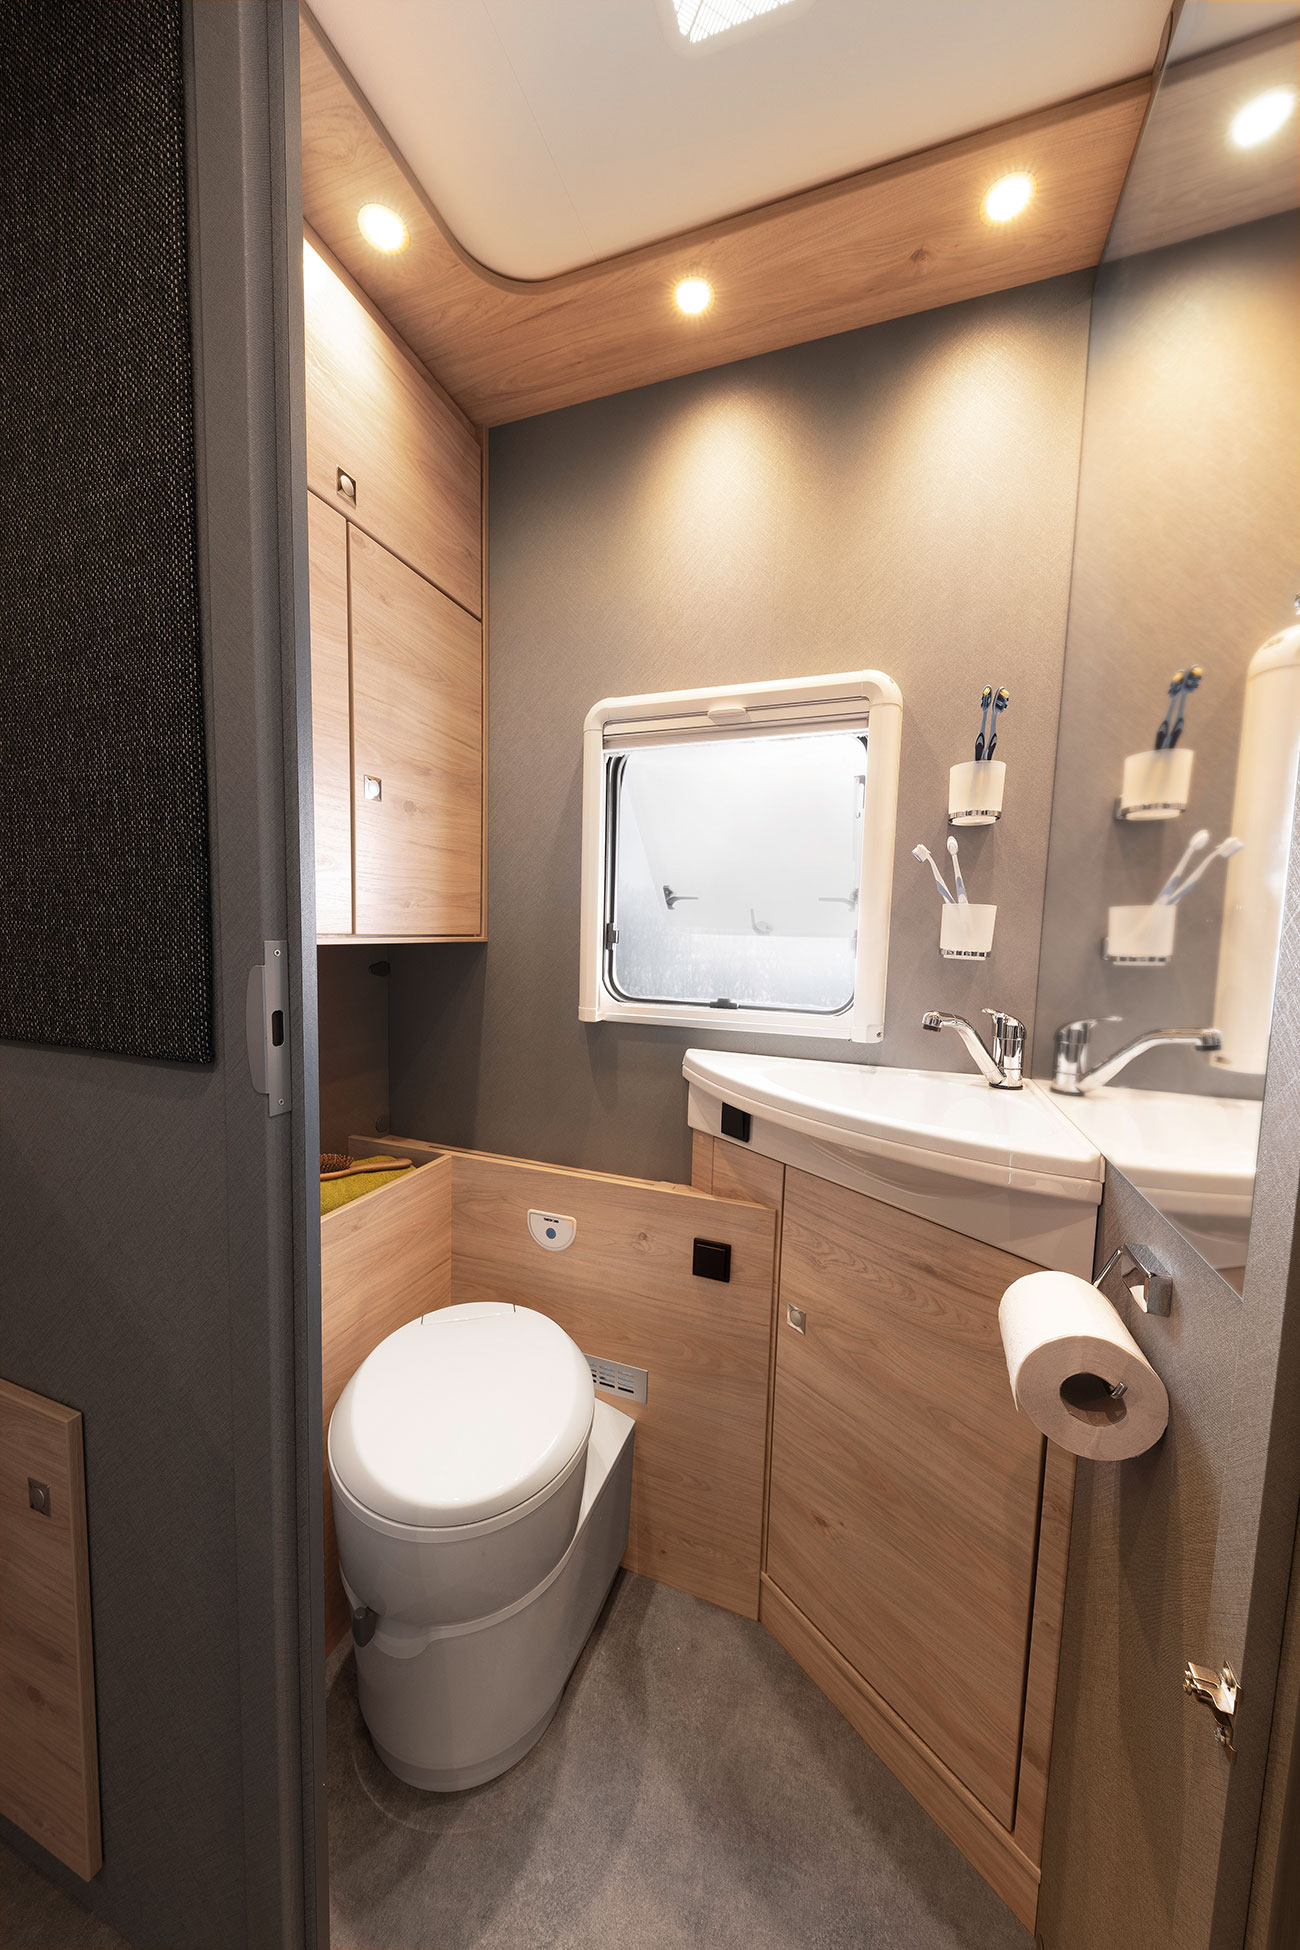 The bathroom is equipped with a large mirror surface that gives both taller and shorter occupants a clear view of themselves. The semi-transparent tinted window and forced-ventilation system in the roof ensure good air flow.